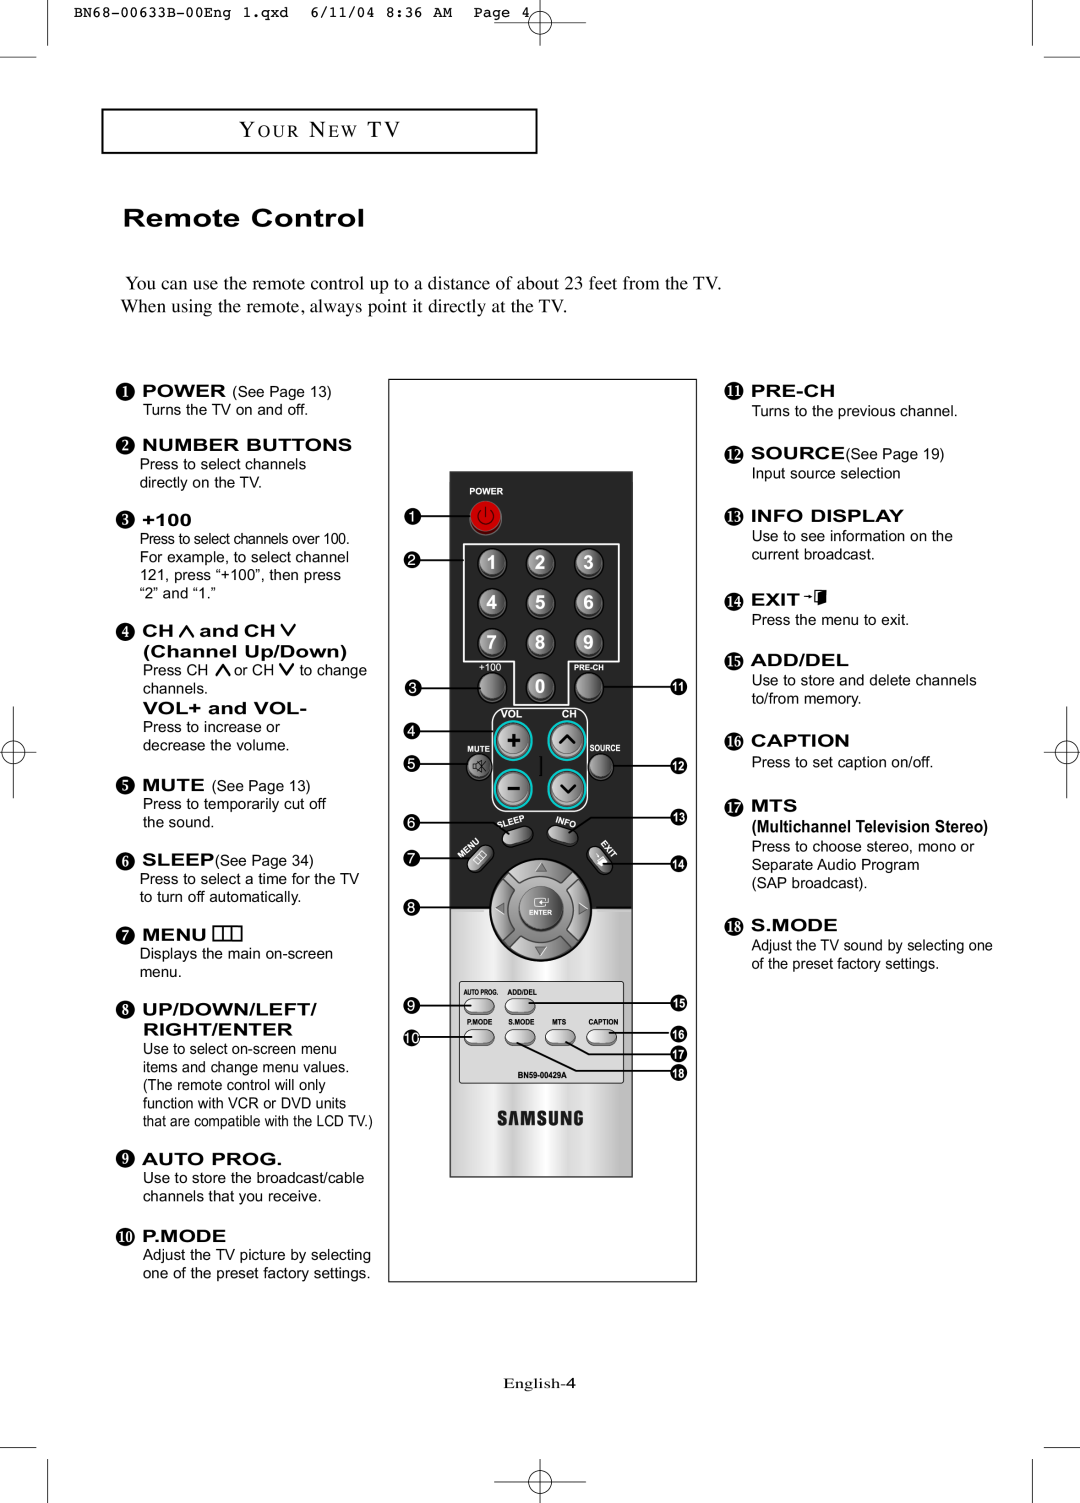 Samsung LT-P1545 Remote Control, Number Buttons, +100, CH and CH Channel Up/Down, VOL+ and VOL, Menu, Auto Prog, P.Mode 